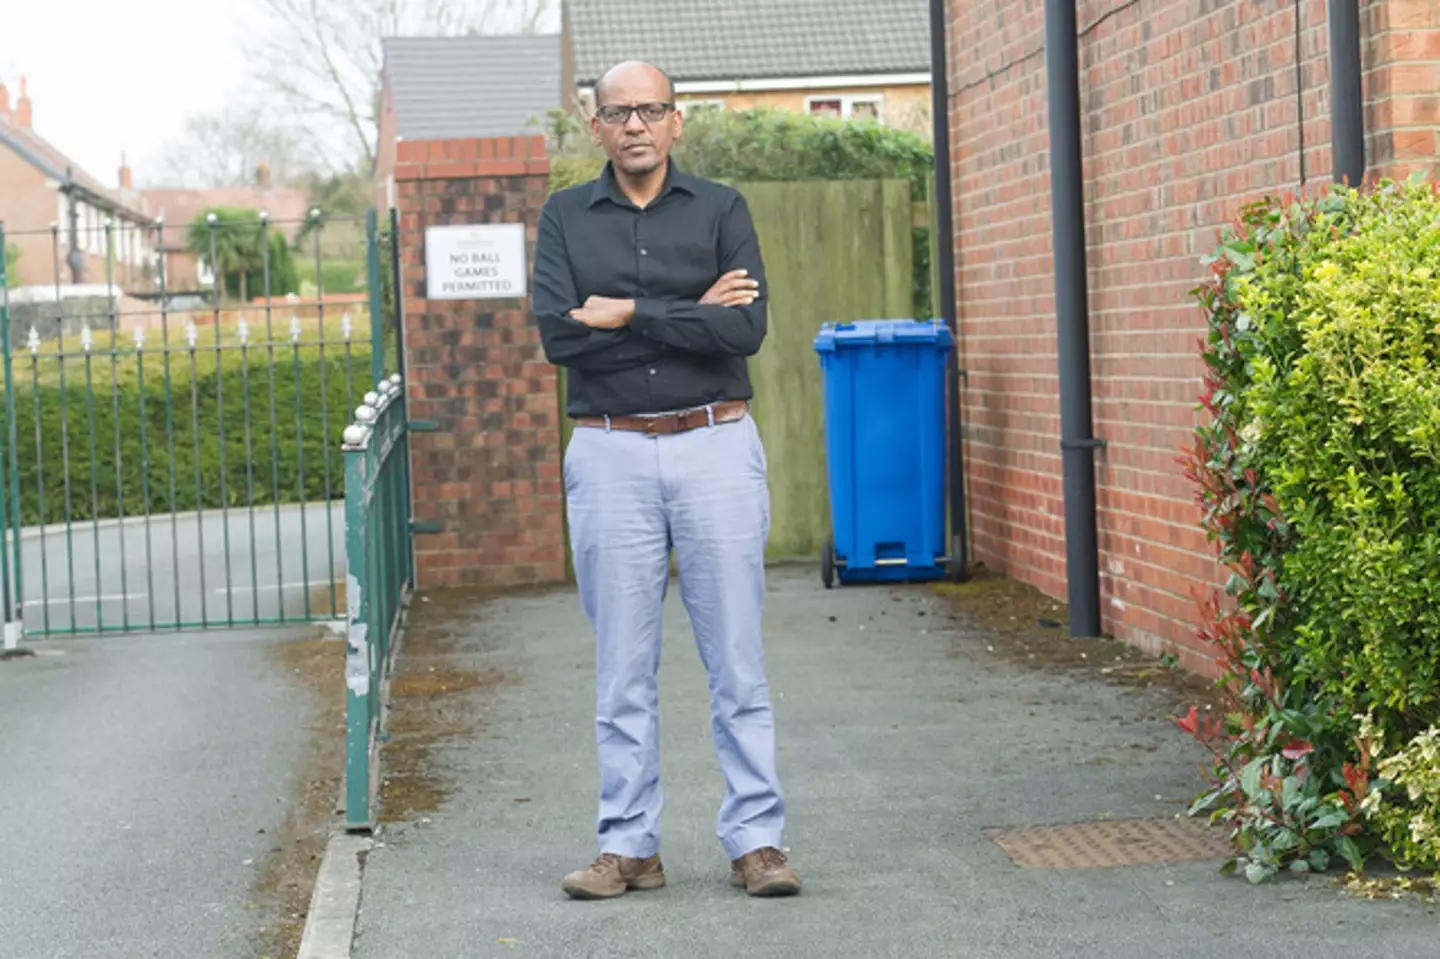 Zekarias Haile couldn't believe his eyes when he saw a stranger's car parked in his drive.